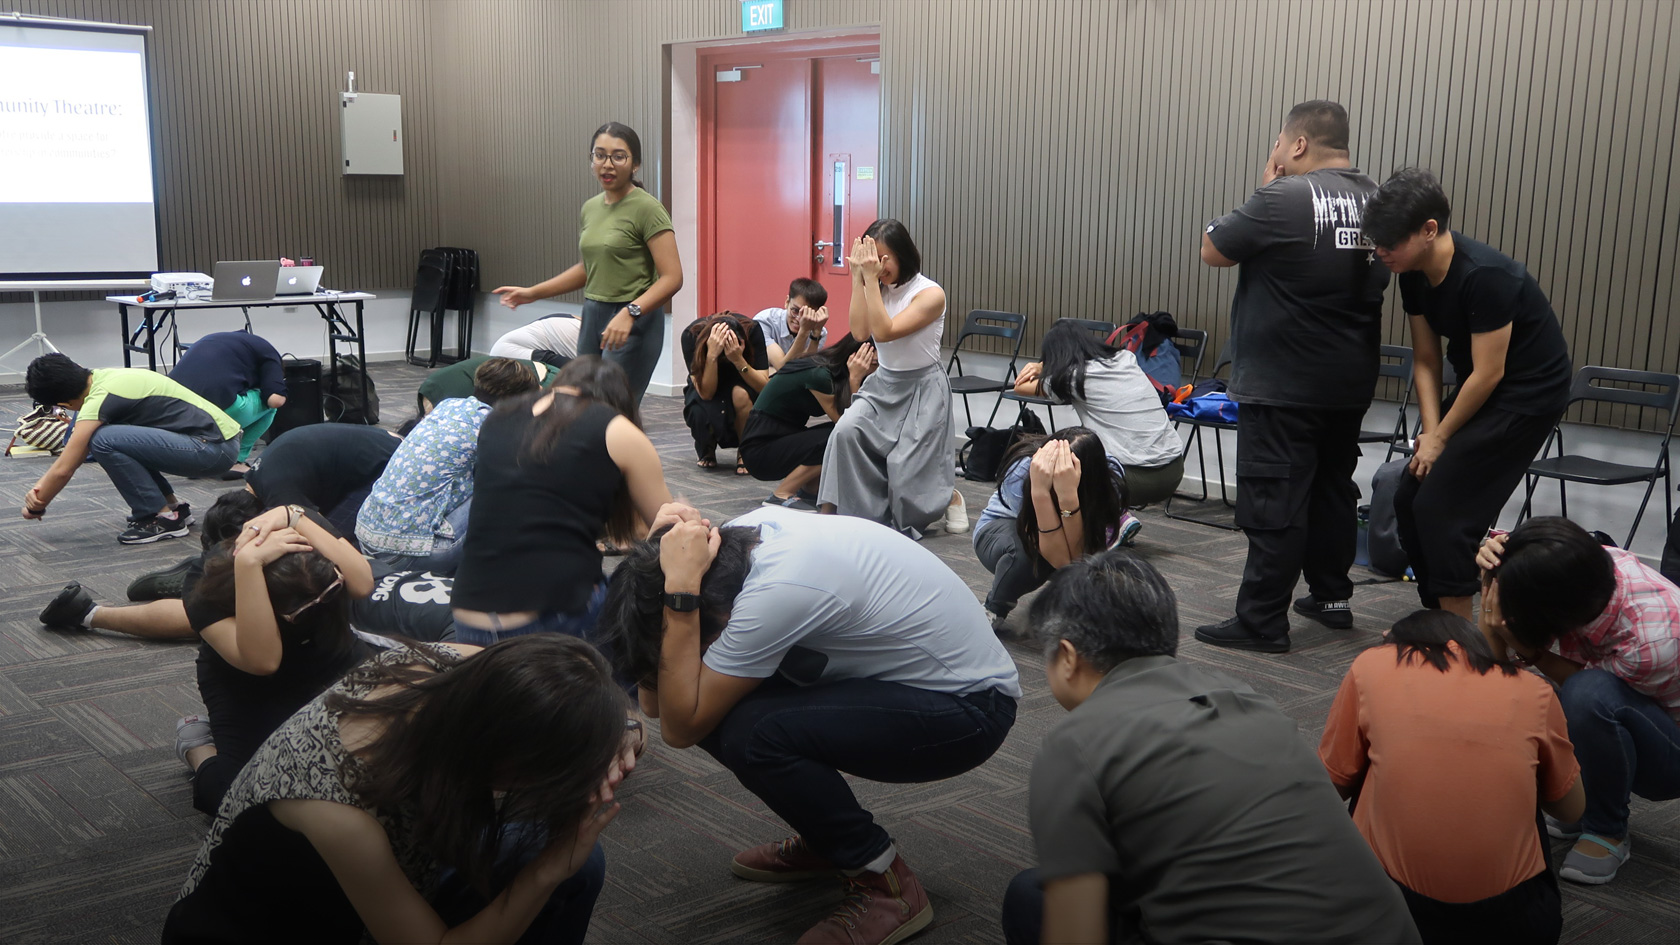 Participants crouching down during a drama activity